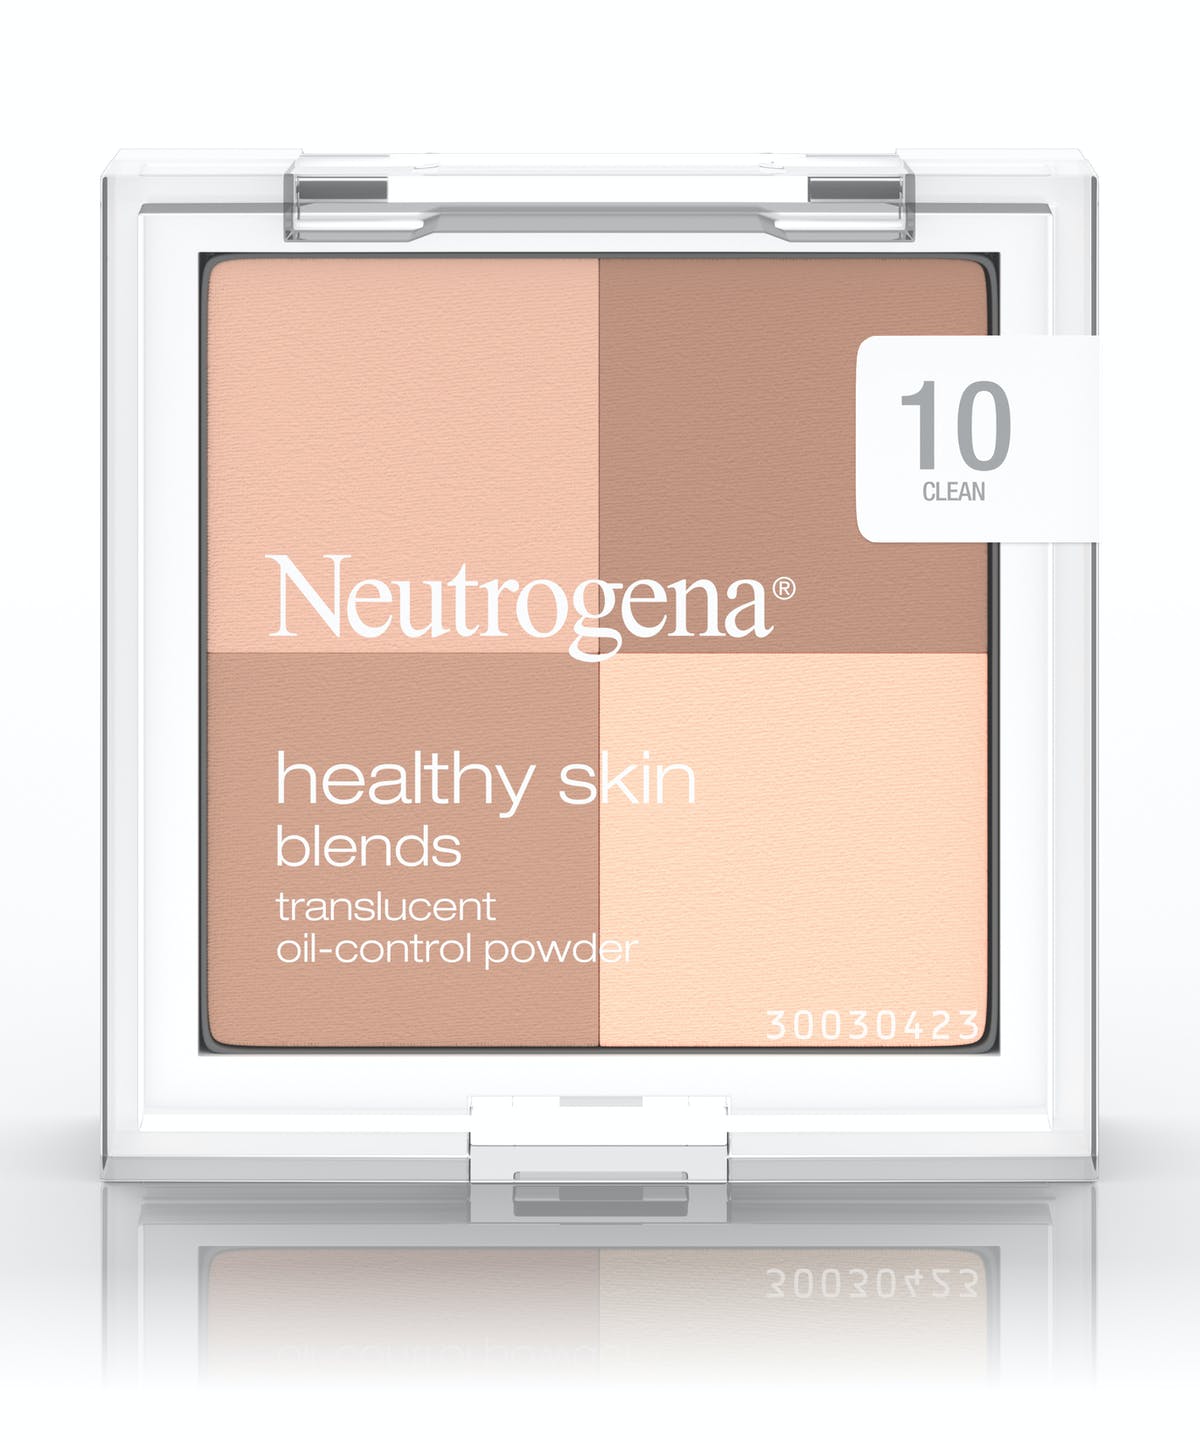 Neutrogena Healthy Skin Blends Powder Blush Makeup Palette, Illuminating Pigmented Blush with Vitamin C and Botanical Conditioners